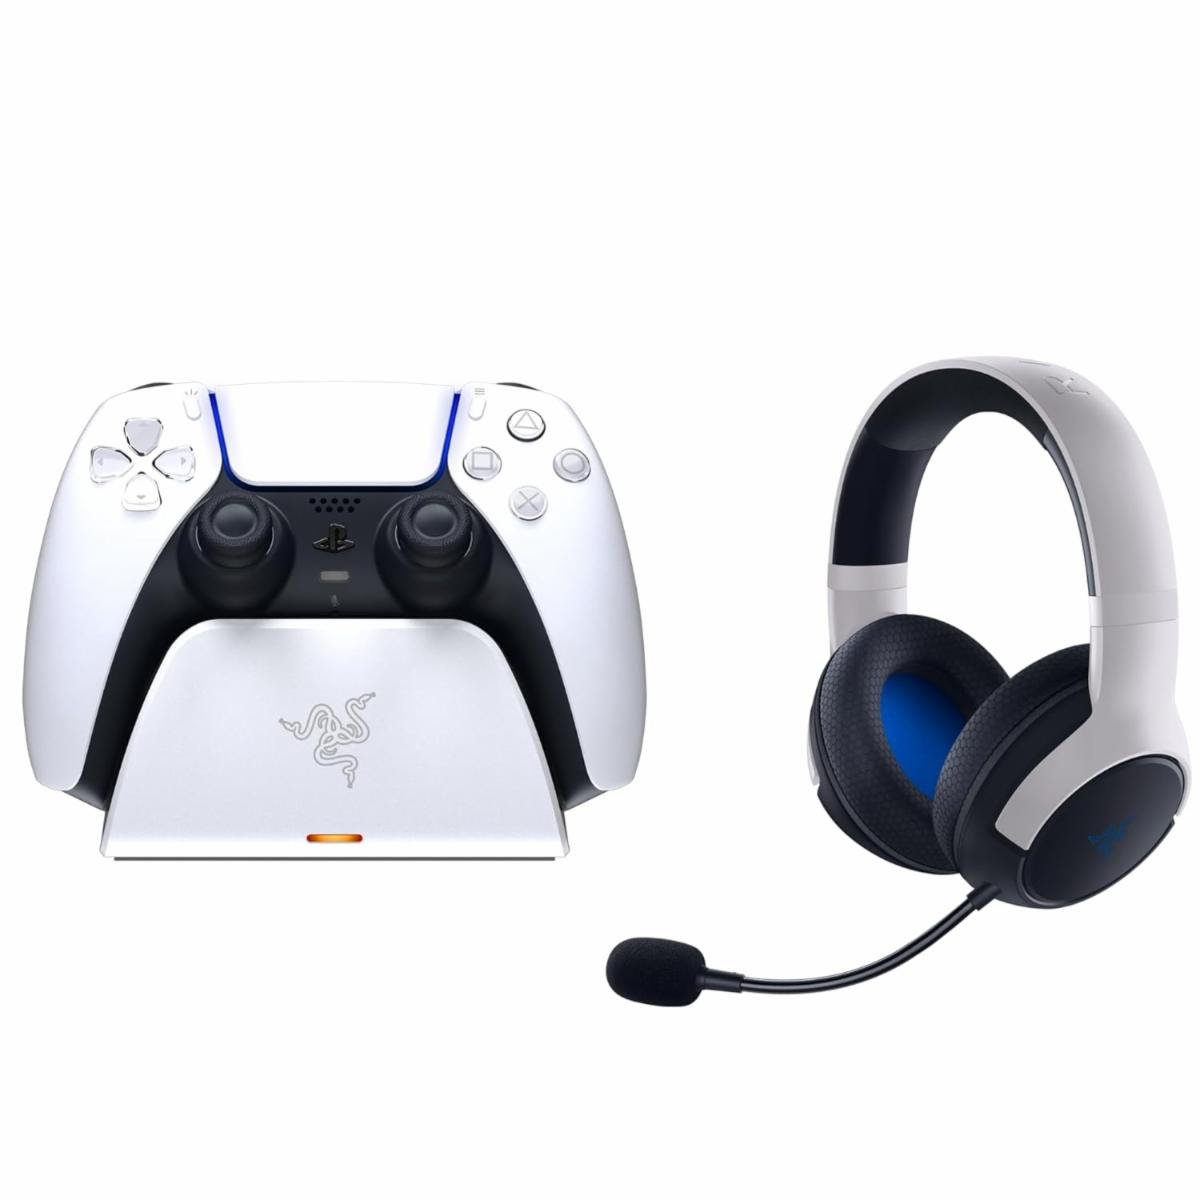 Razer Legendary Duo Bundle for Play-station, Kaira Wireless Headset and Quick Charging Stand for PS5, White - CONTROLLER NOT INCLUDED